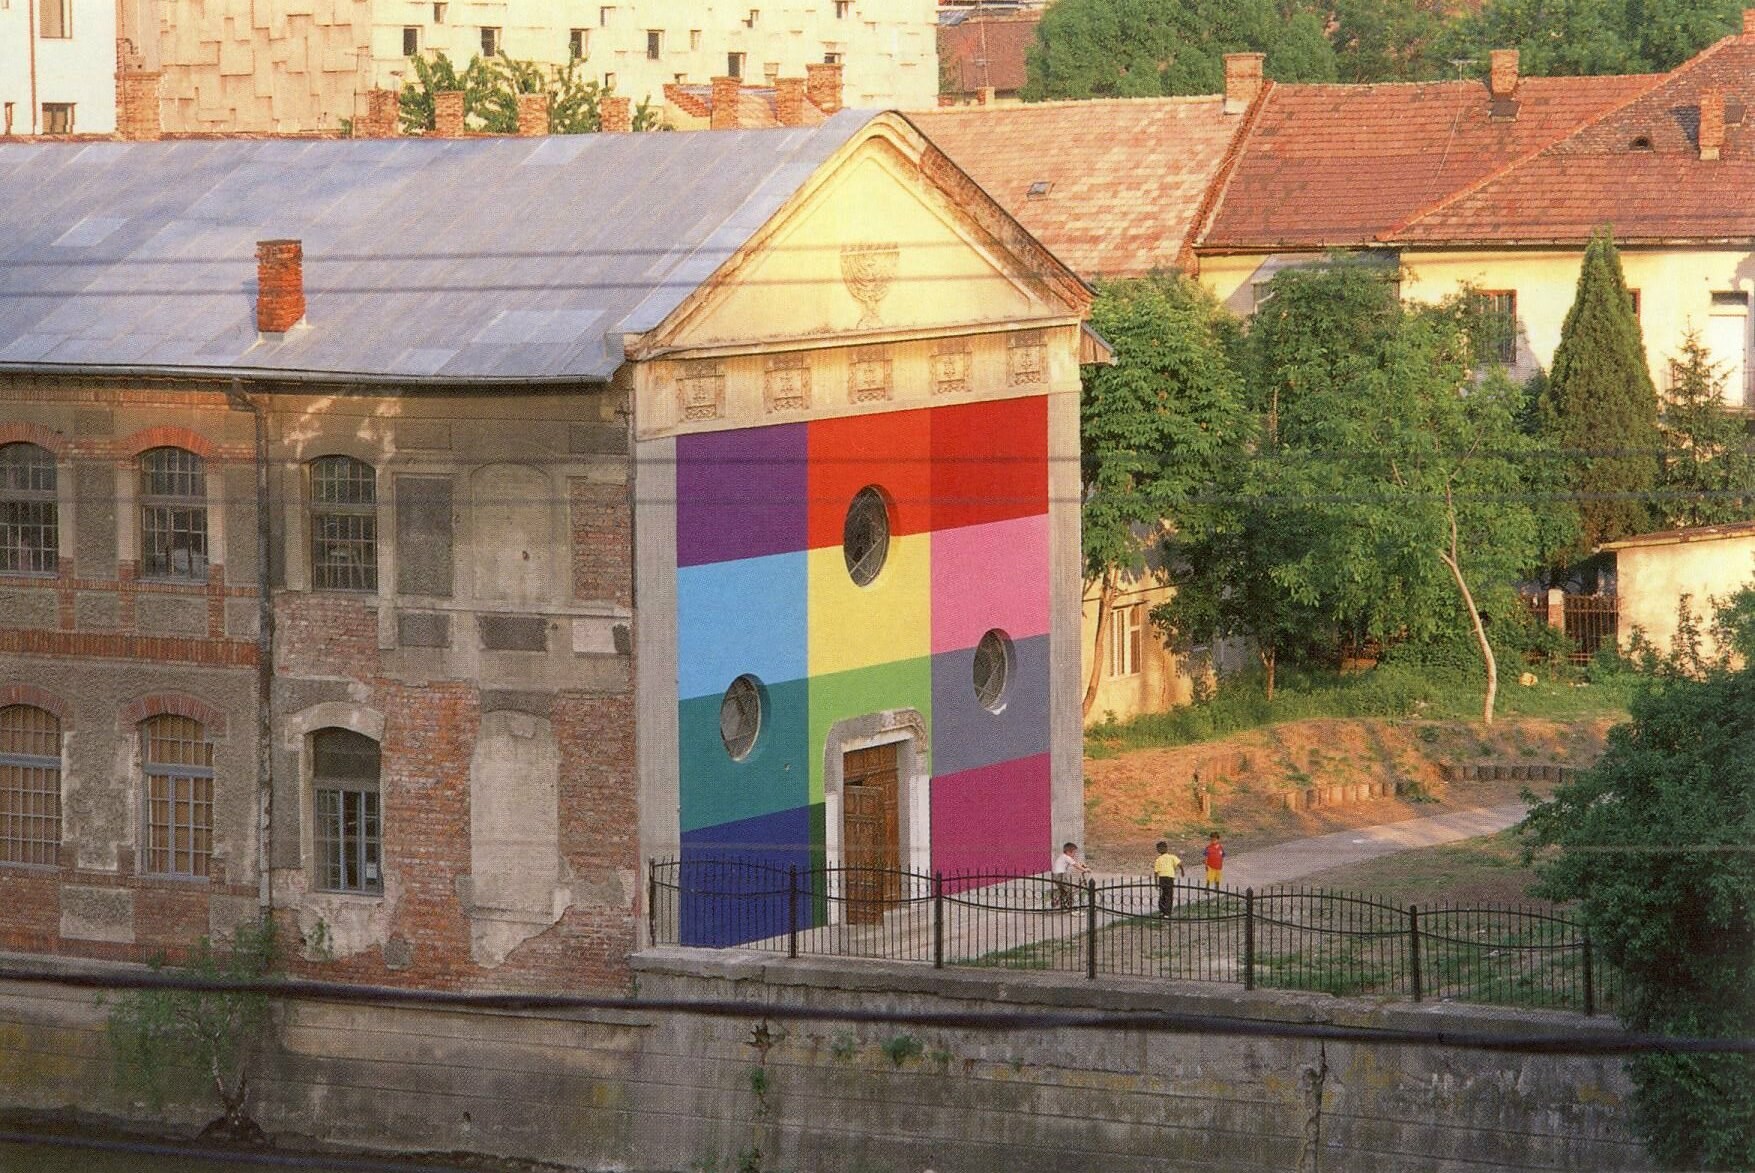 Tranzit House exterior with a colorful mural painted on the front entrance.